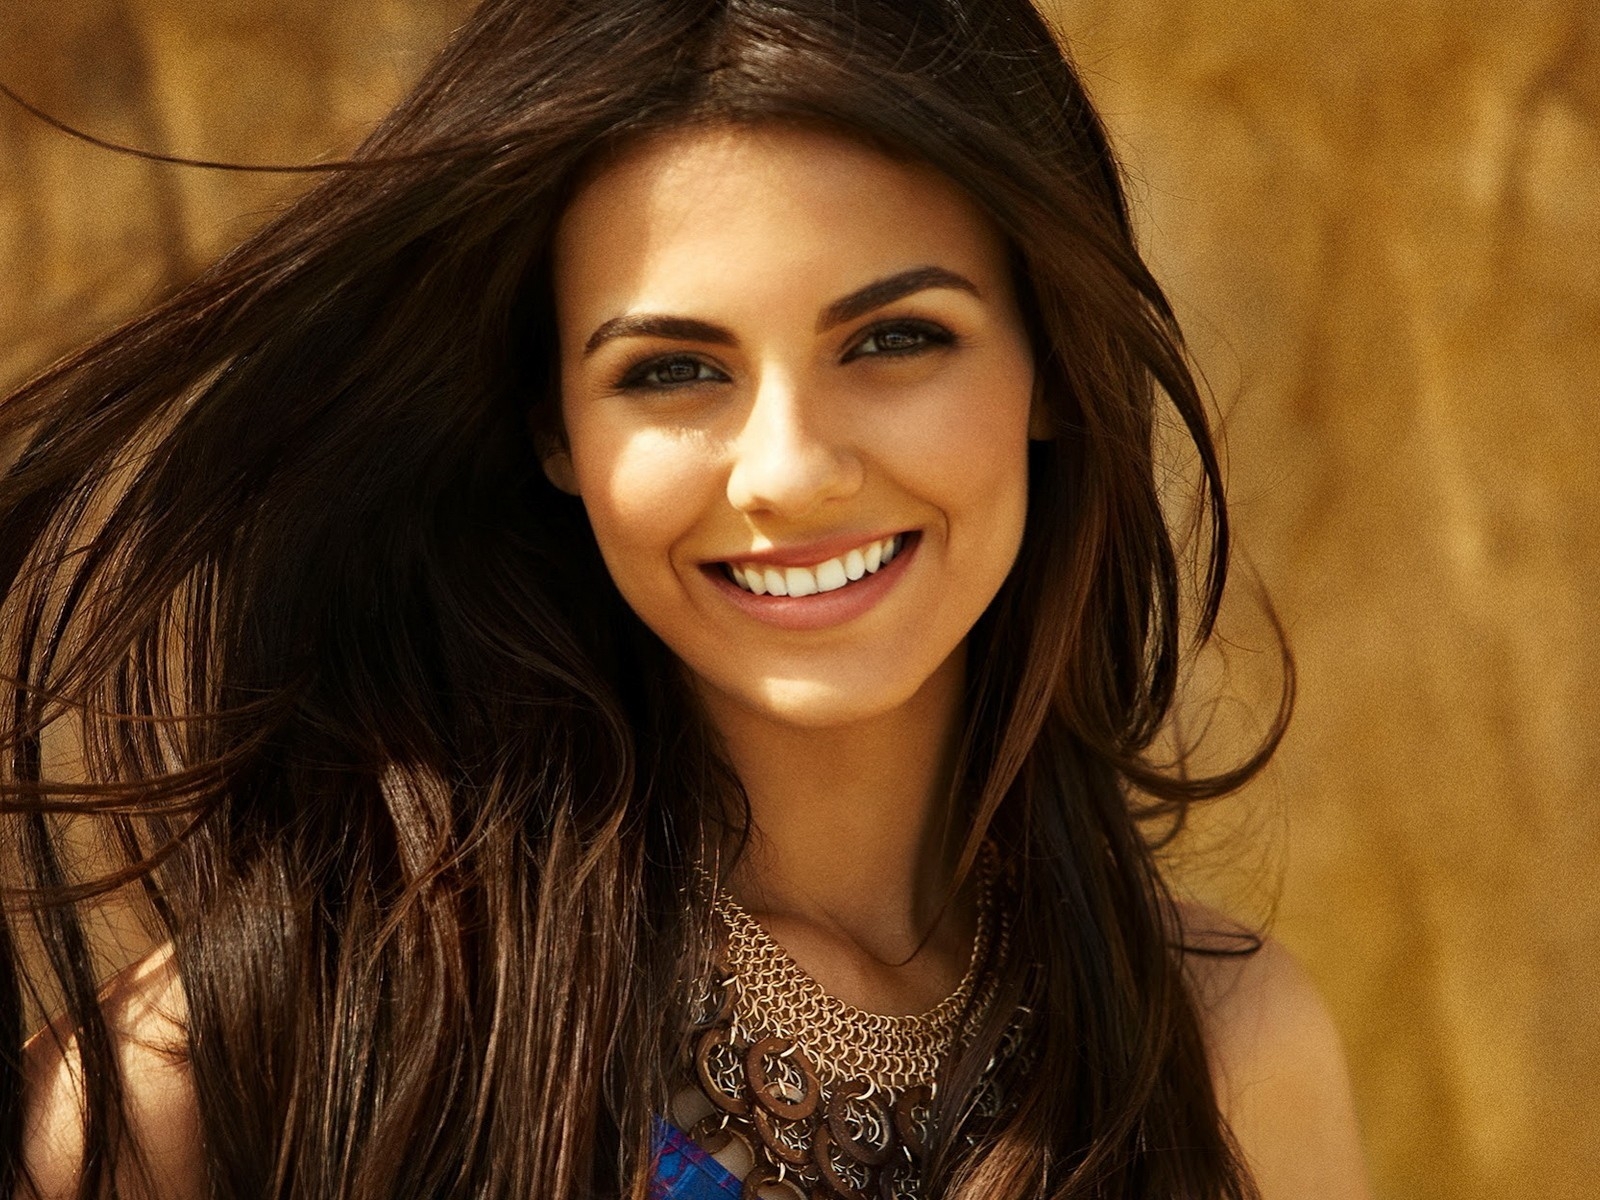 Cute Smile of Victoria Justice for 1600 x 1200 resolution